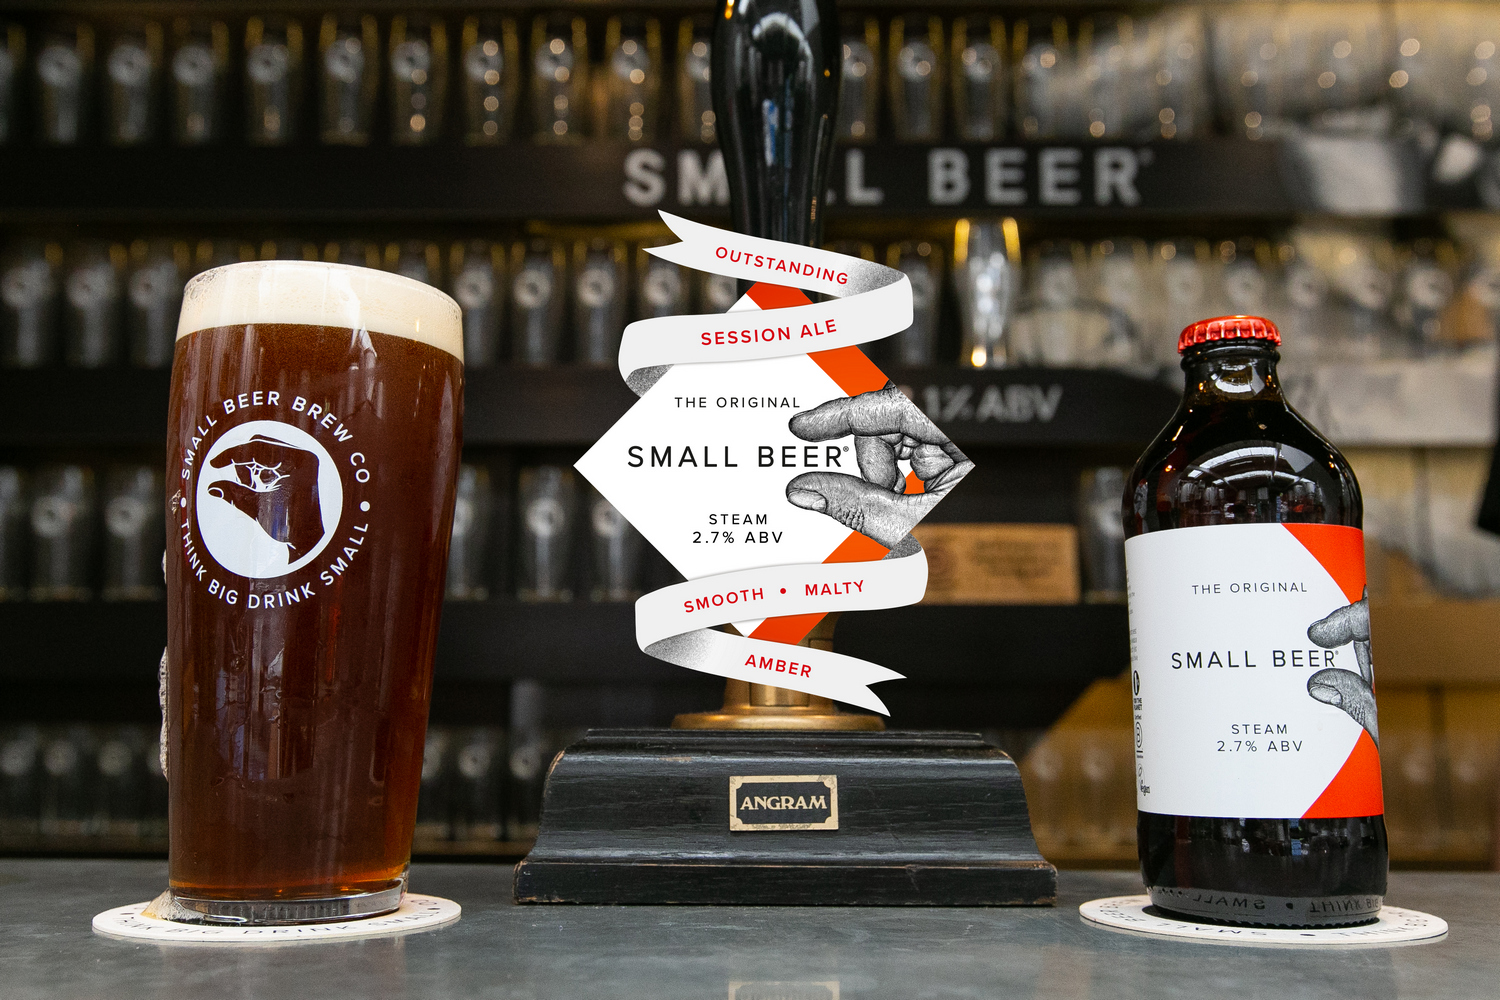 Small Beer supports cask category with Steam launch thumbnail